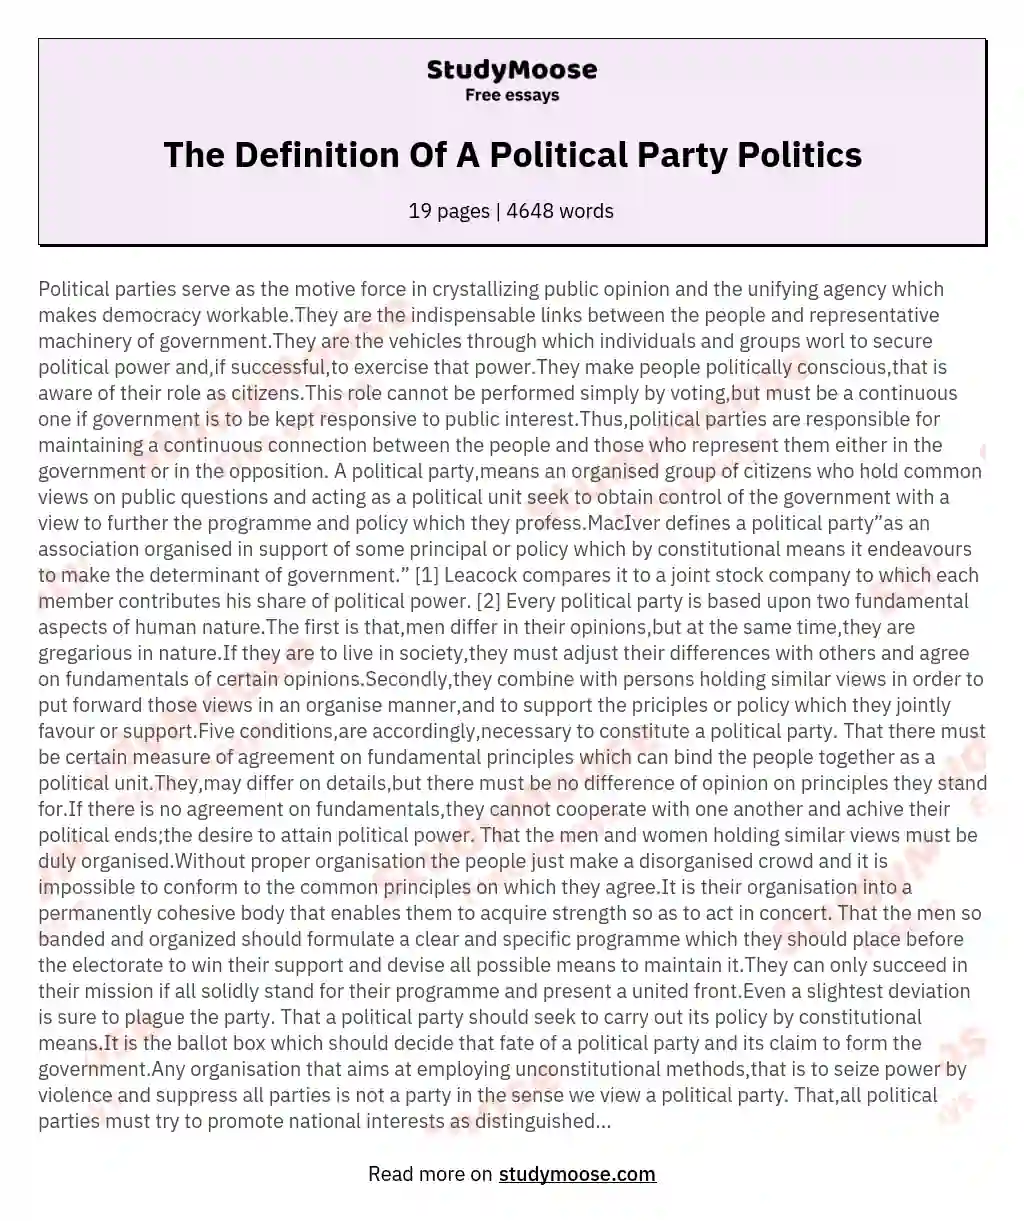 The Definition Of A Political Party Politics